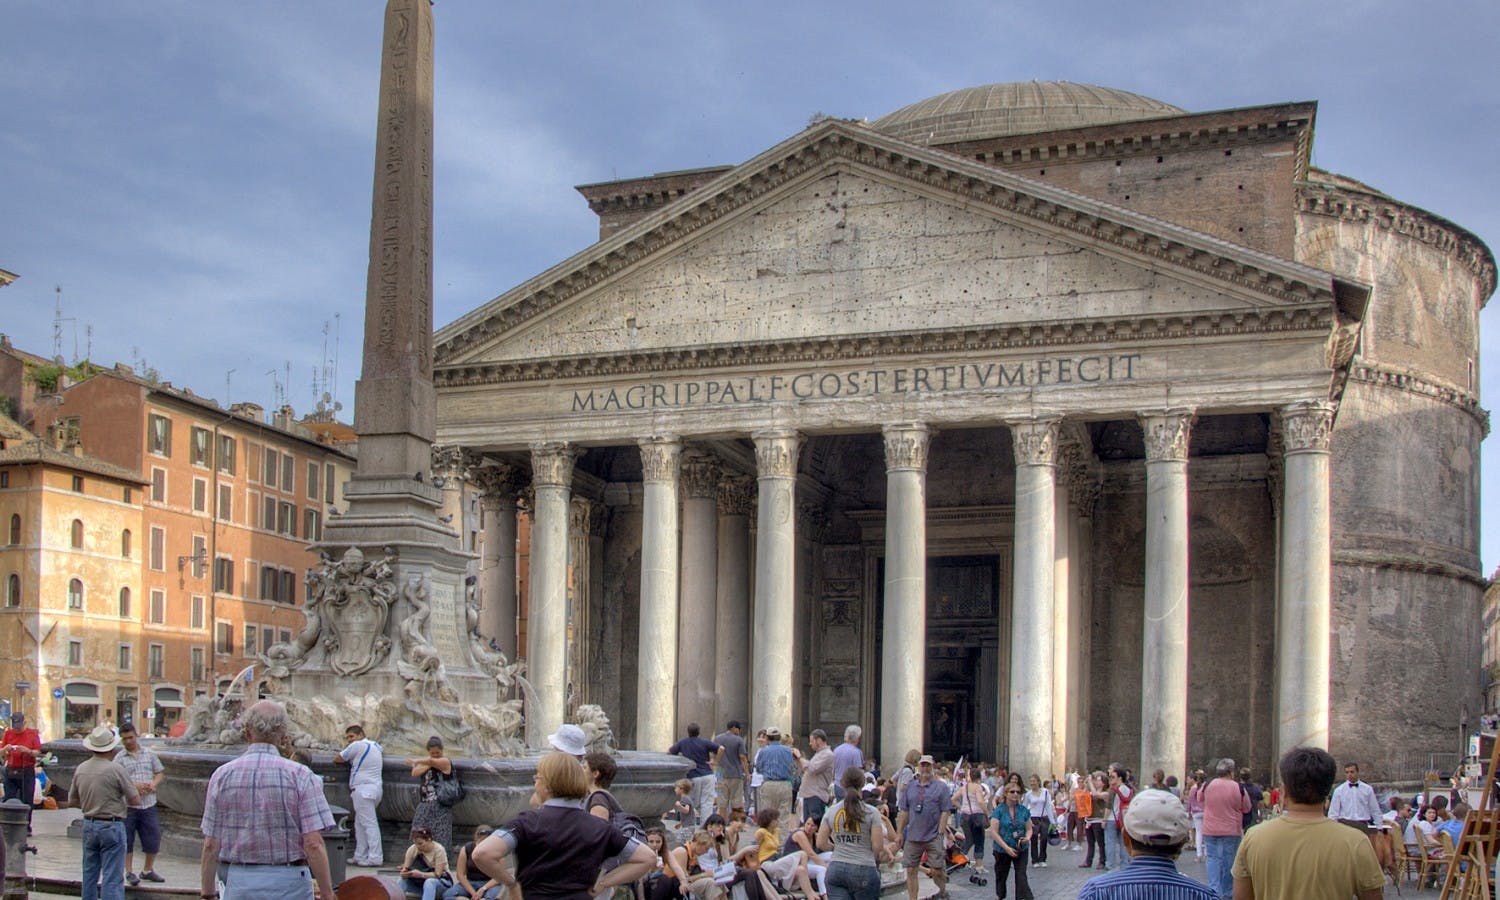 Ancient Rome tour with Colosseum, Pantheon and Piazza Navona